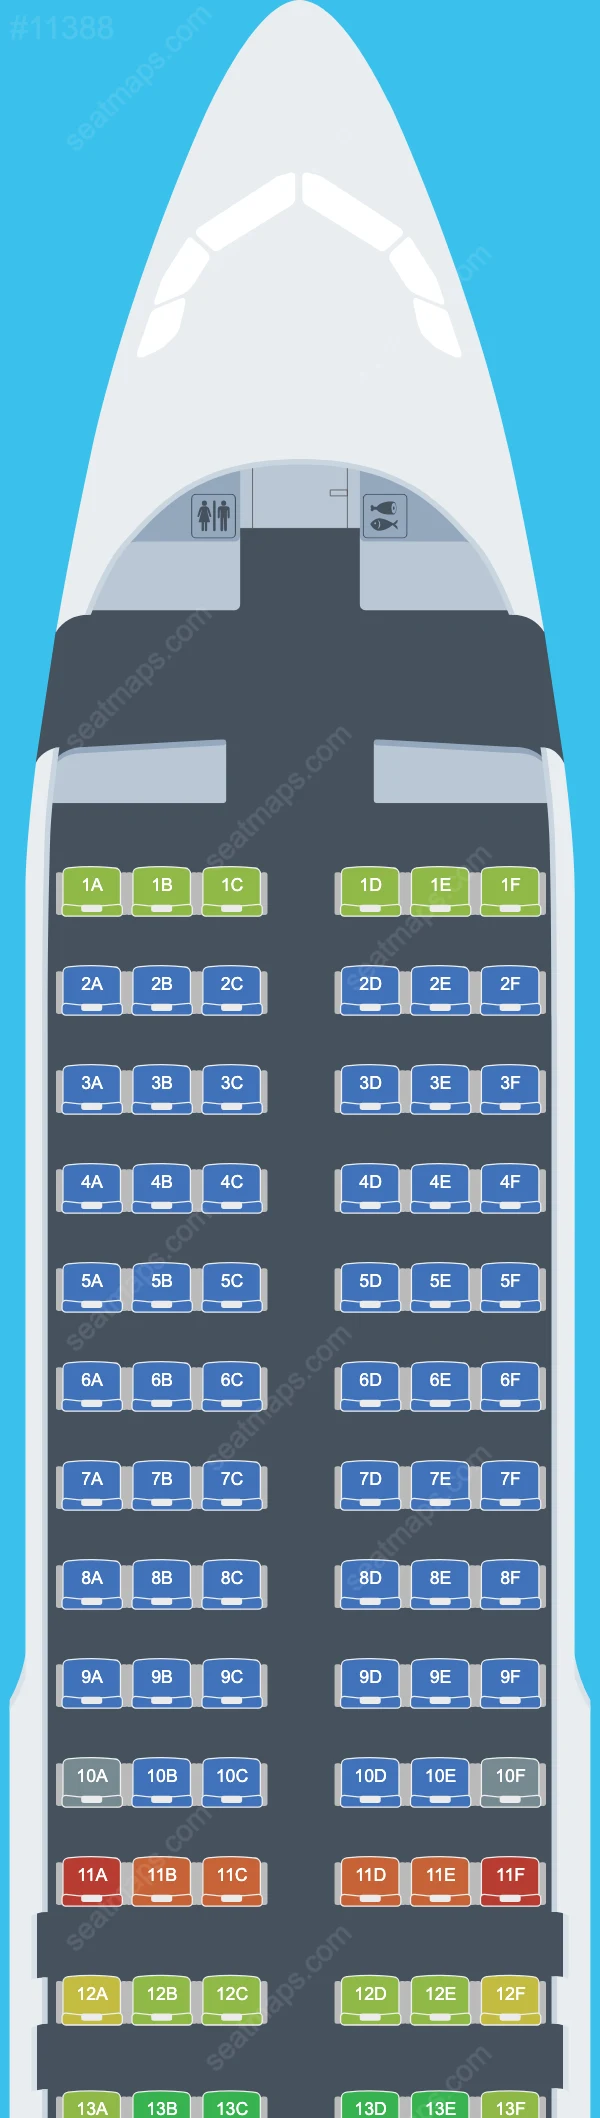 Fly Lili Airbus A320-200 seatmap preview